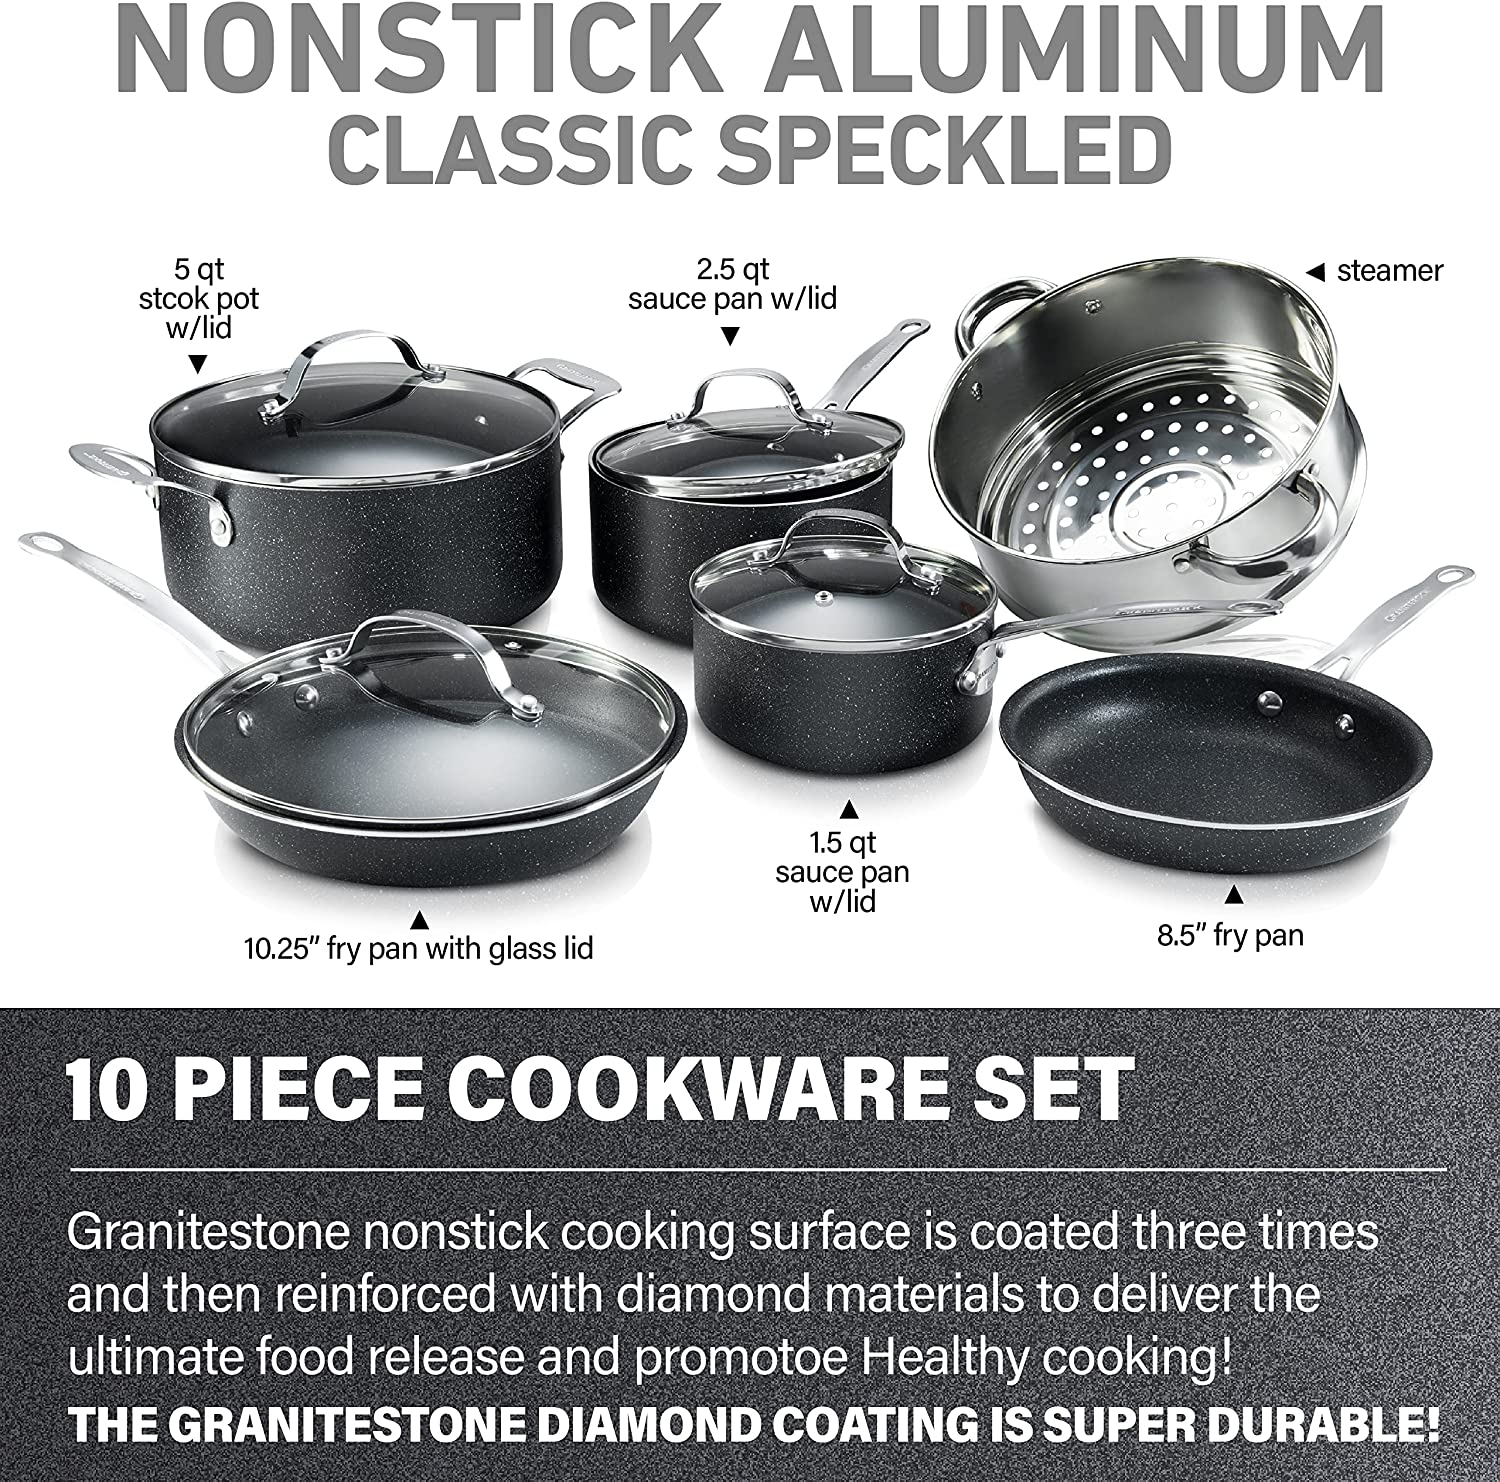 Granite Stone Pots and Pans Set, 10 Piece Nonstick Cookware Set, Includes Steamer, Scratch Resistant, Granite Coated, Dishwasher and Oven-Safe, PFOA-Free, Black - image 4 of 11